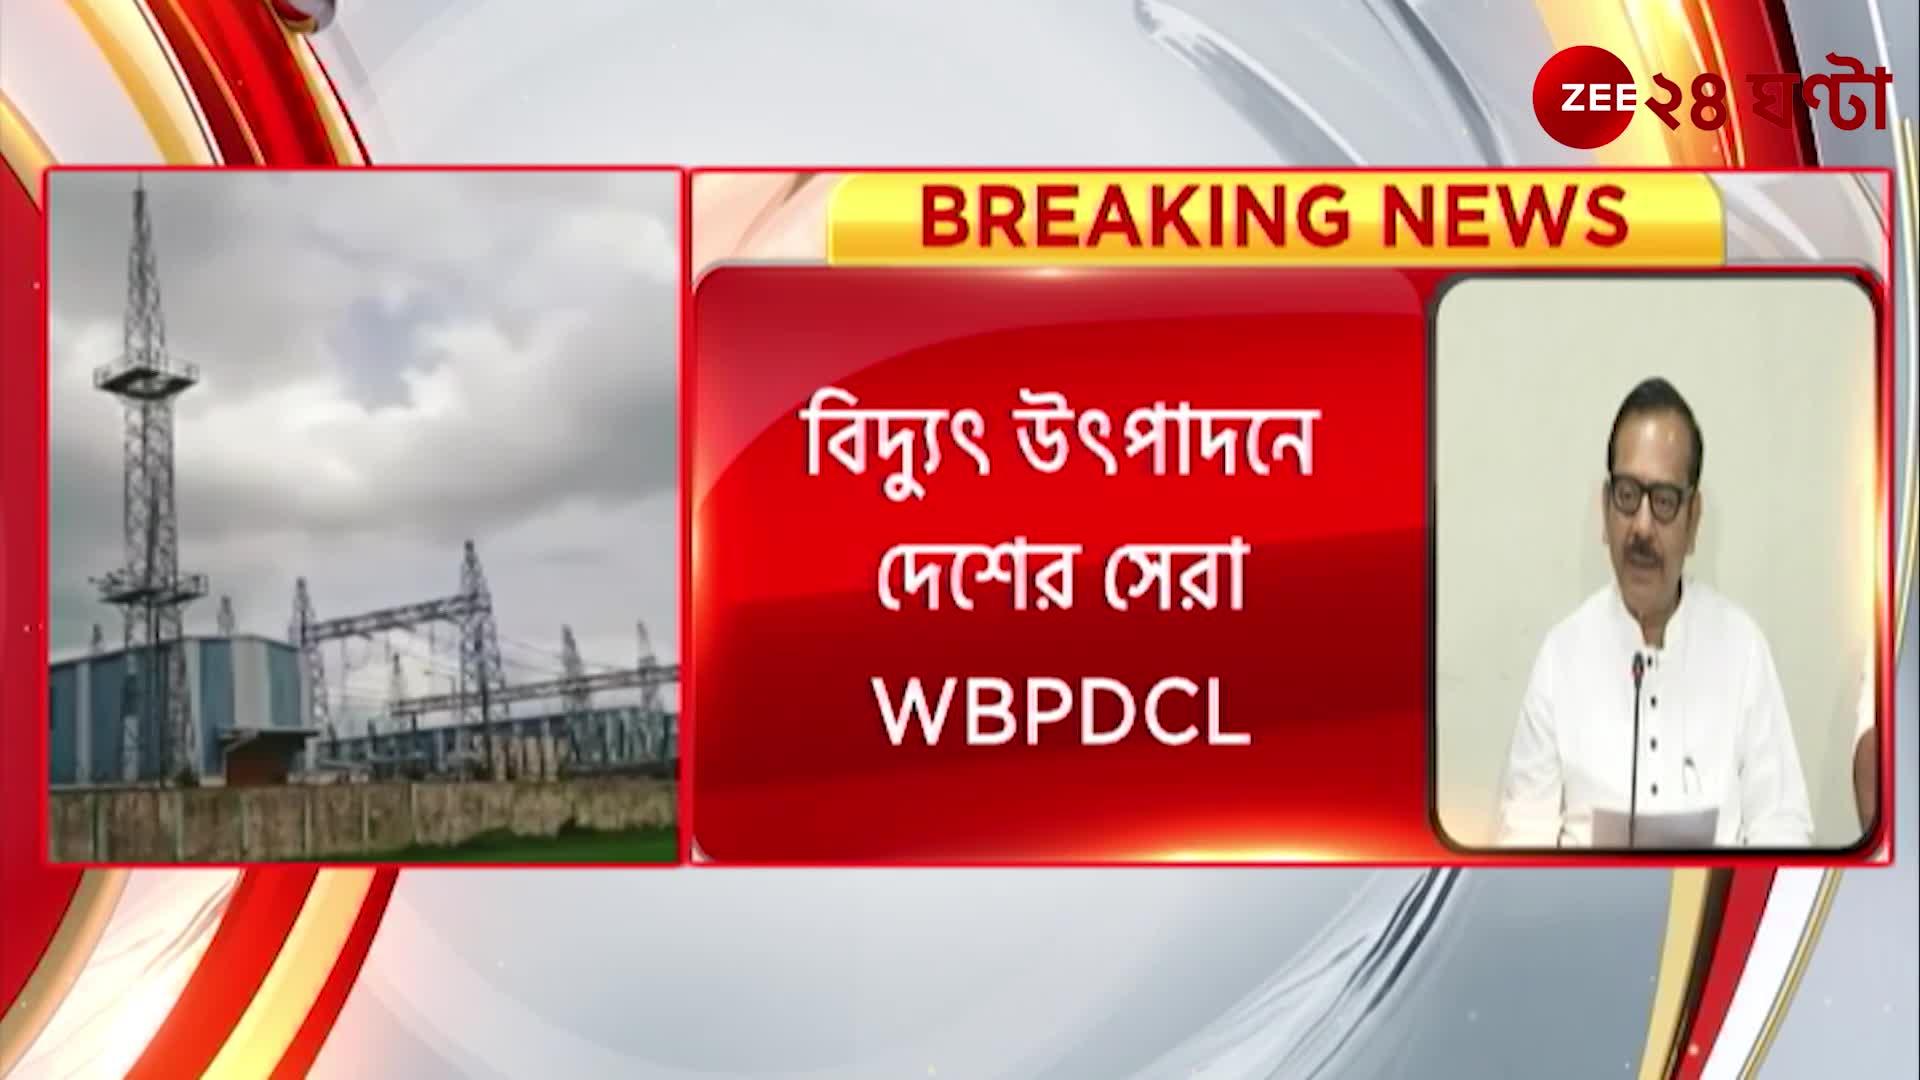 Thermal Power Plant WBPDCL is the best state thermal power plant in the country in terms of power generation